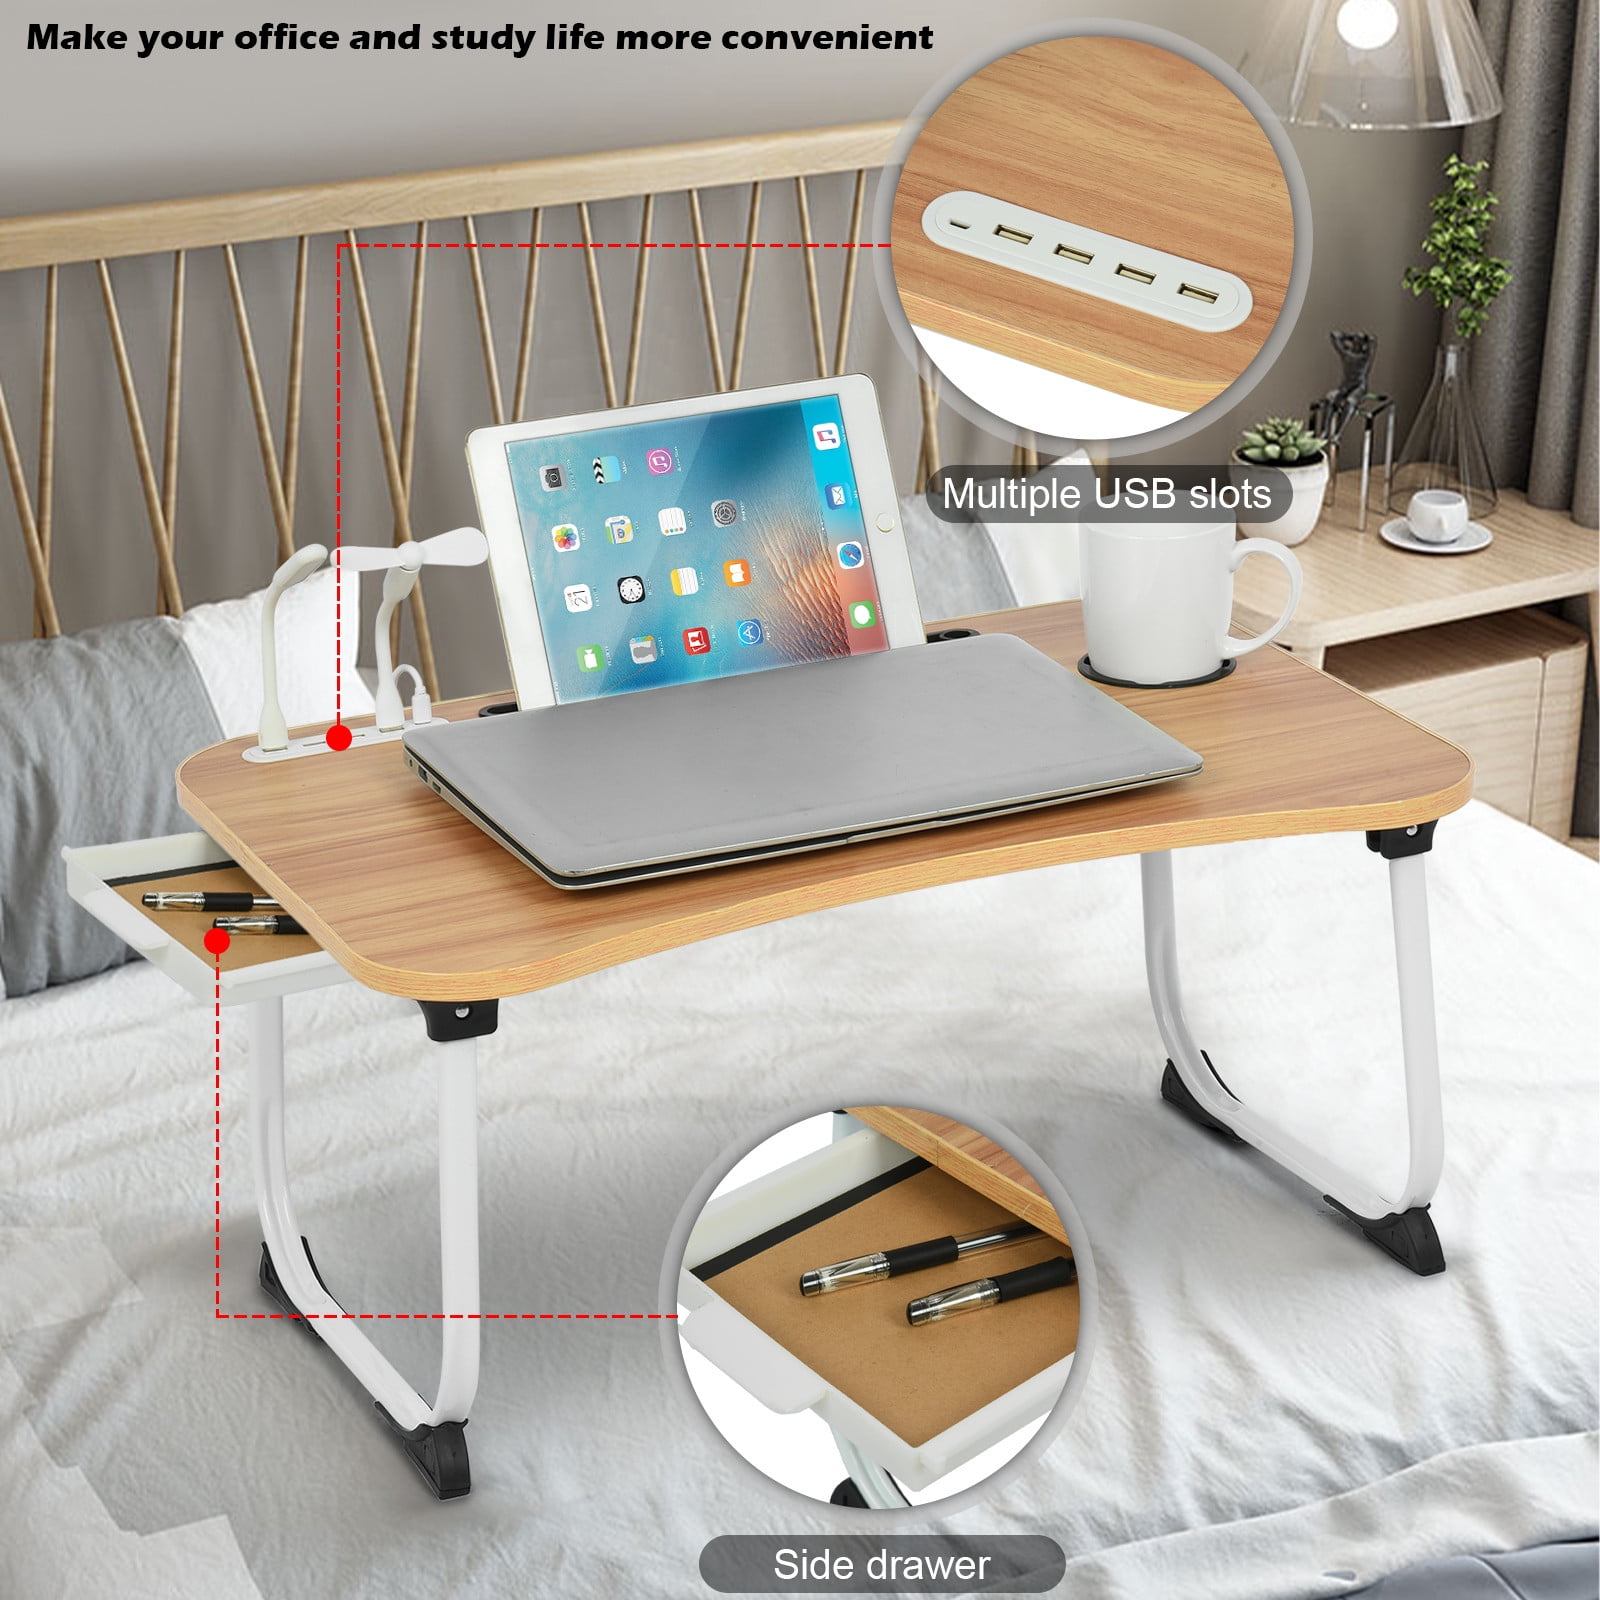 Overbed Table Laptop Bed Table，Portable Bamboo Laptop Stand Foldable Desk Notebook Table Laptop Bed Tray Bed Table Color : Color1 Flower Style Design Play Games On Bed Table with Drawer